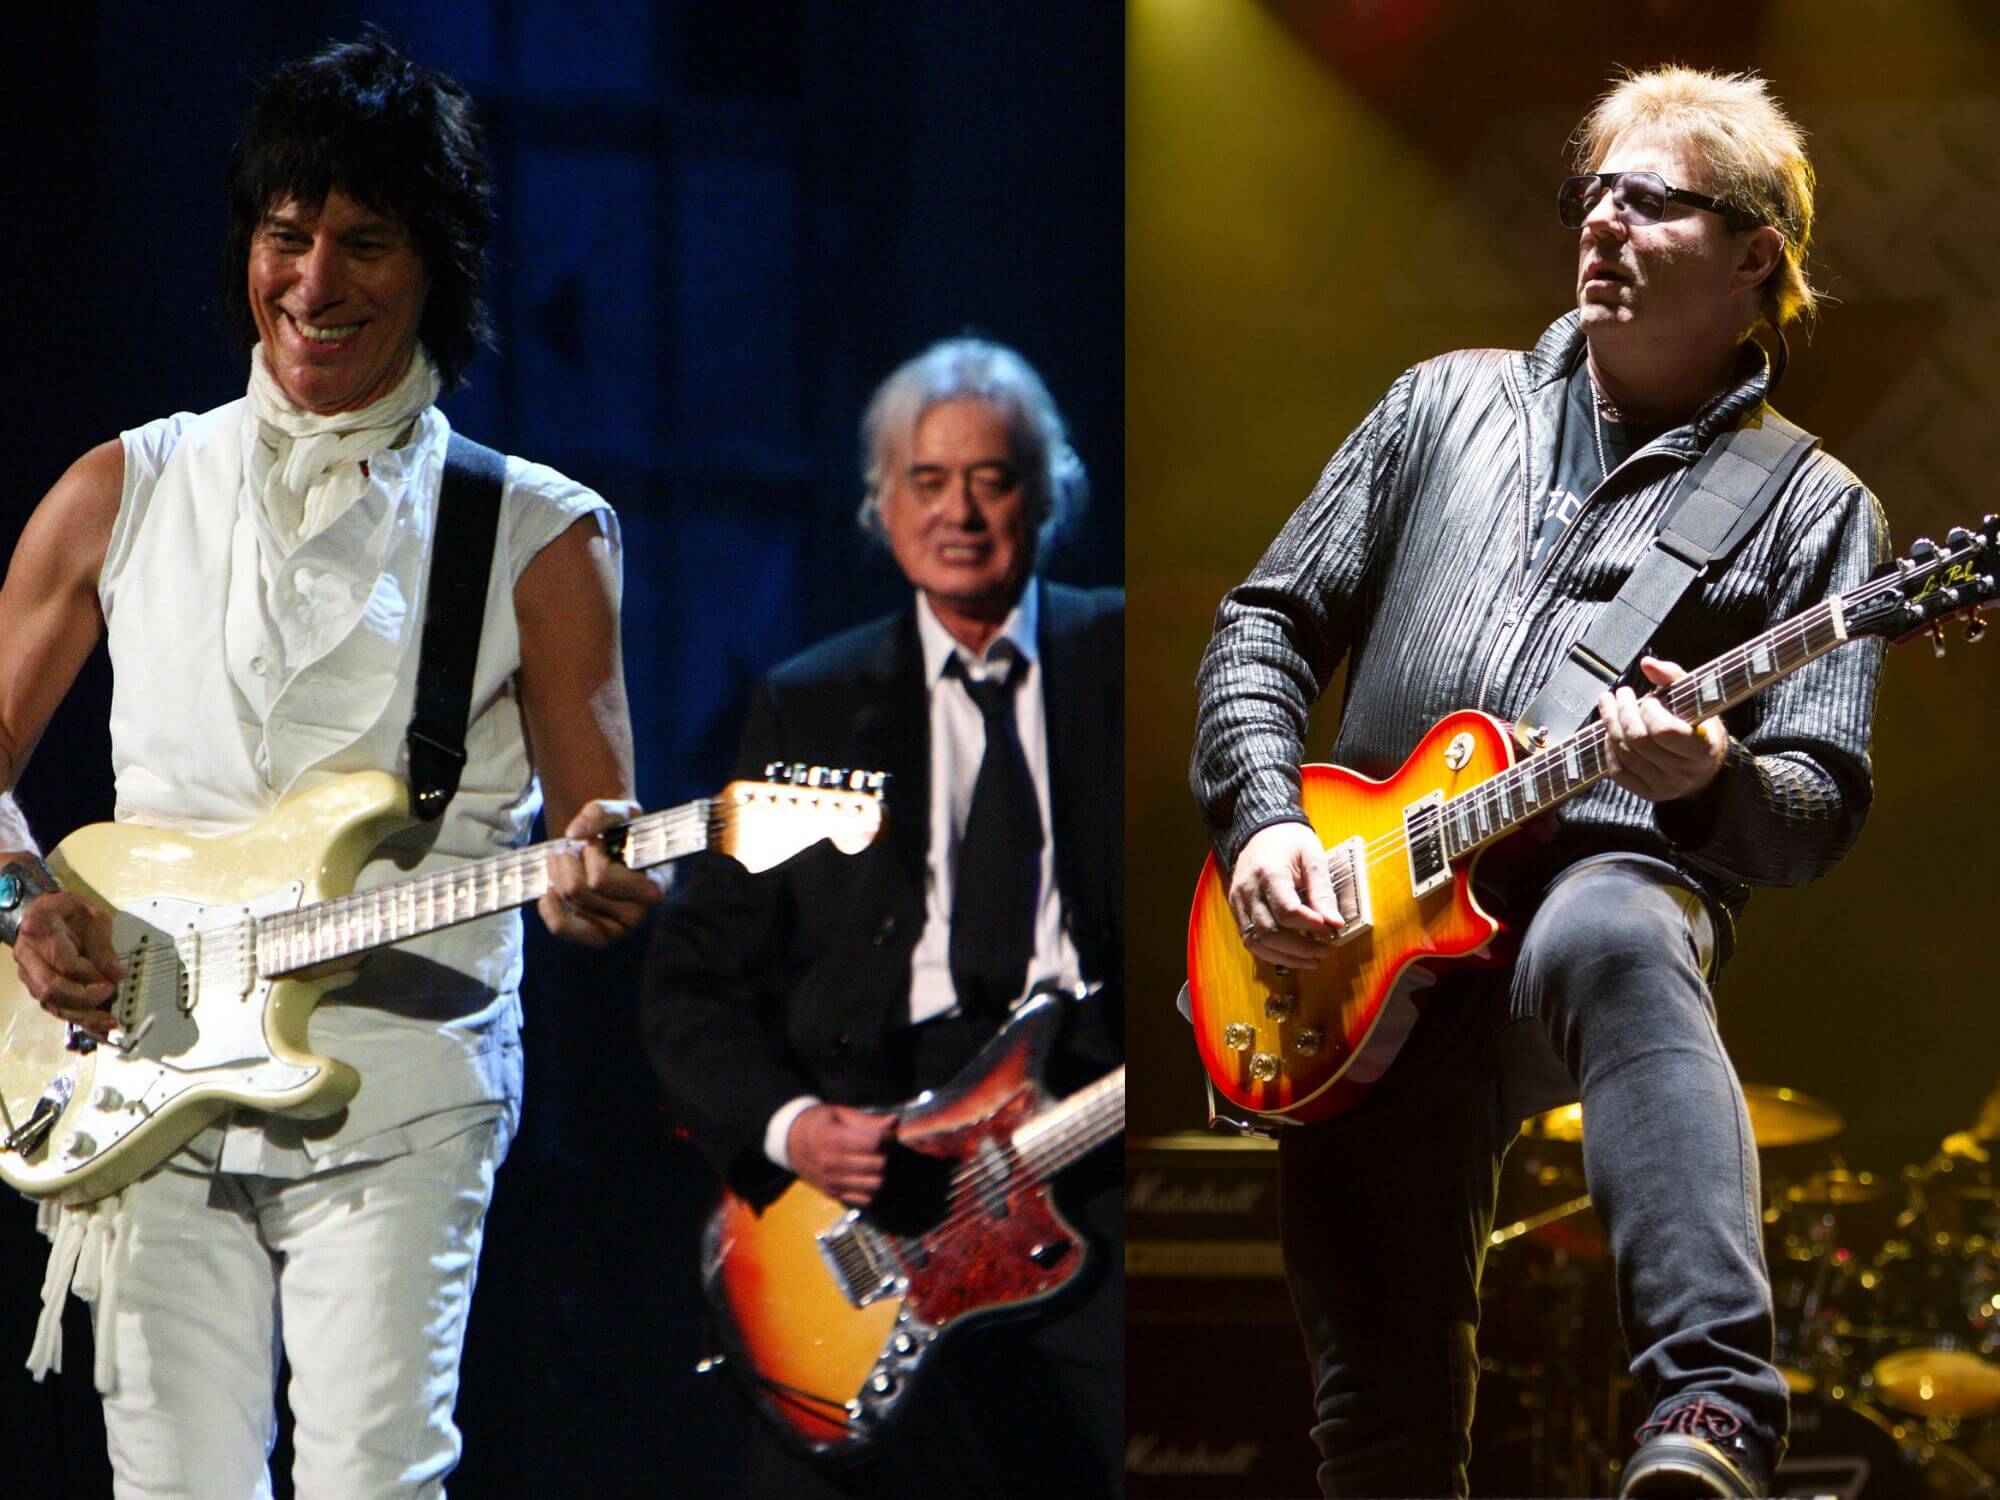 Twisted Sister guitarist Jay Jay French on Jimmy Page & Jeff Beck